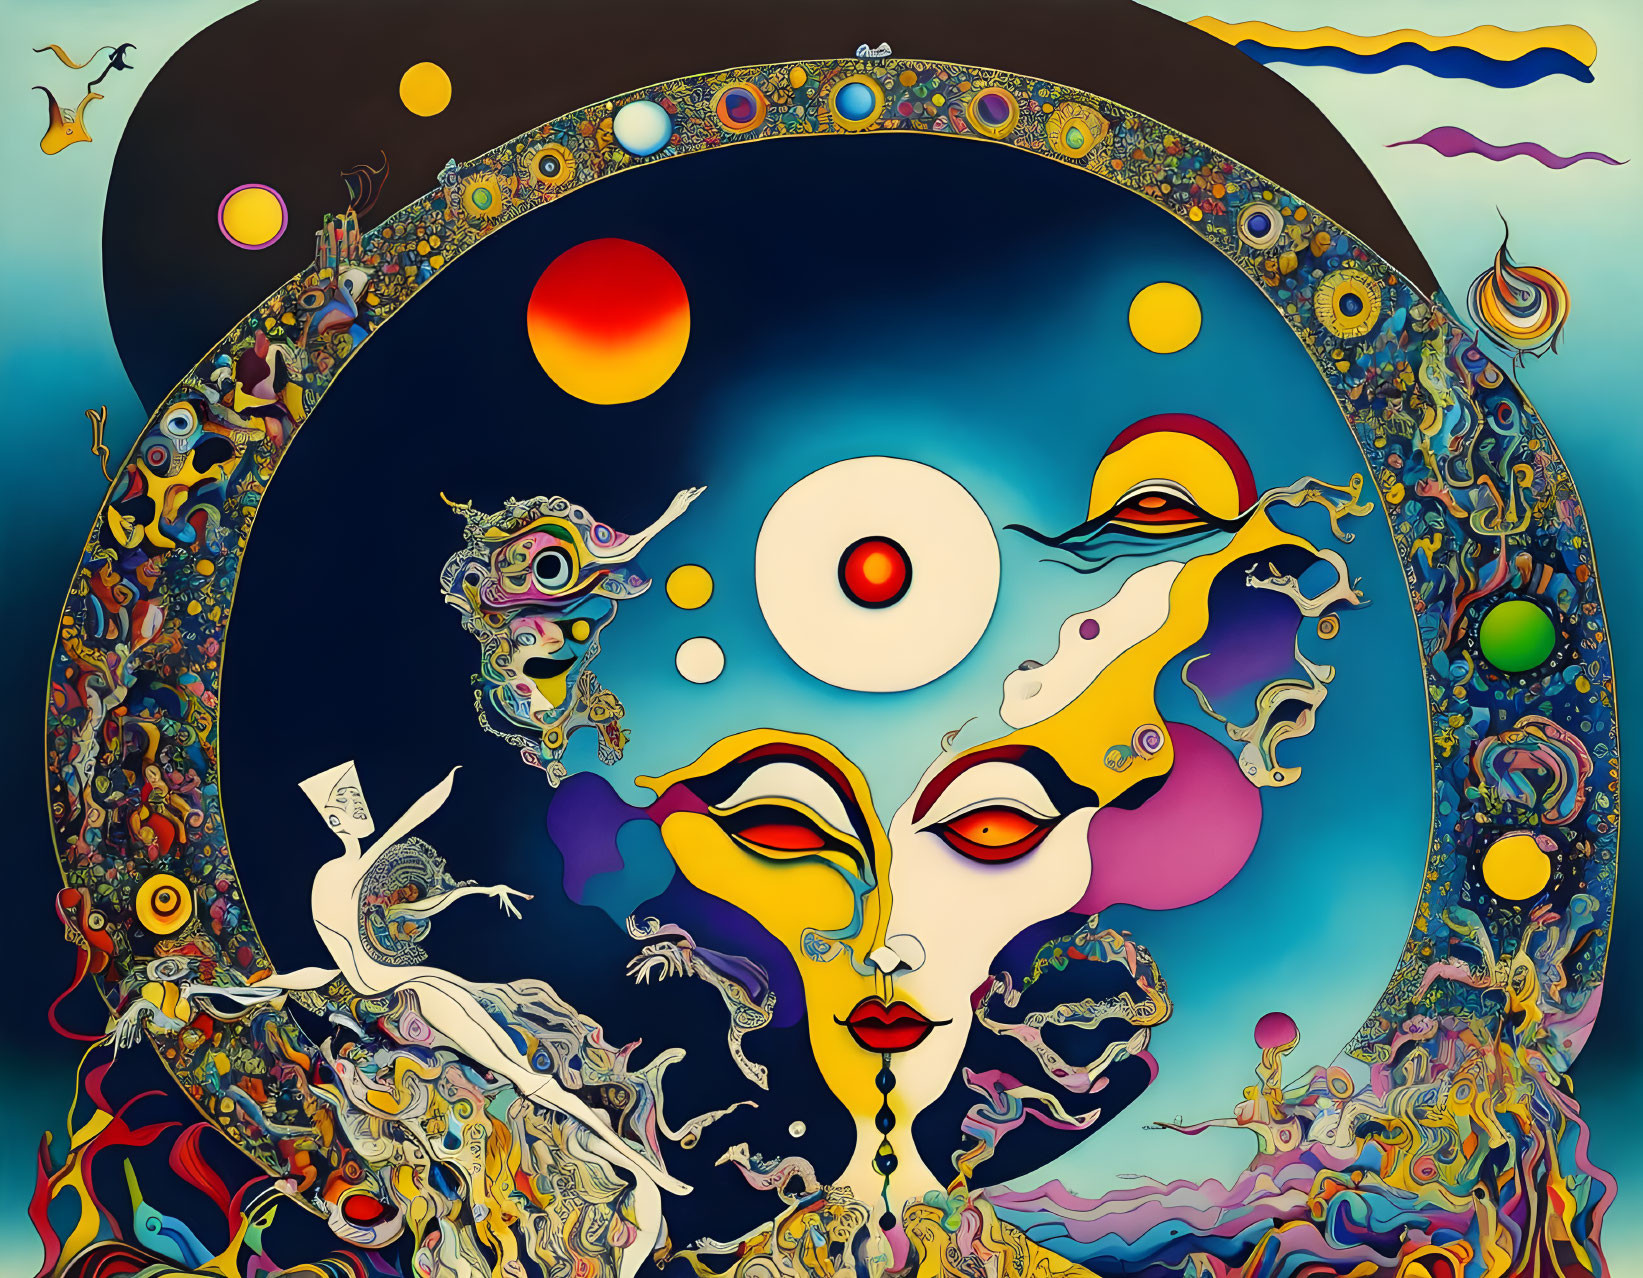 Colorful Abstract Artwork: Faces, Celestial Bodies, and Fluid Patterns